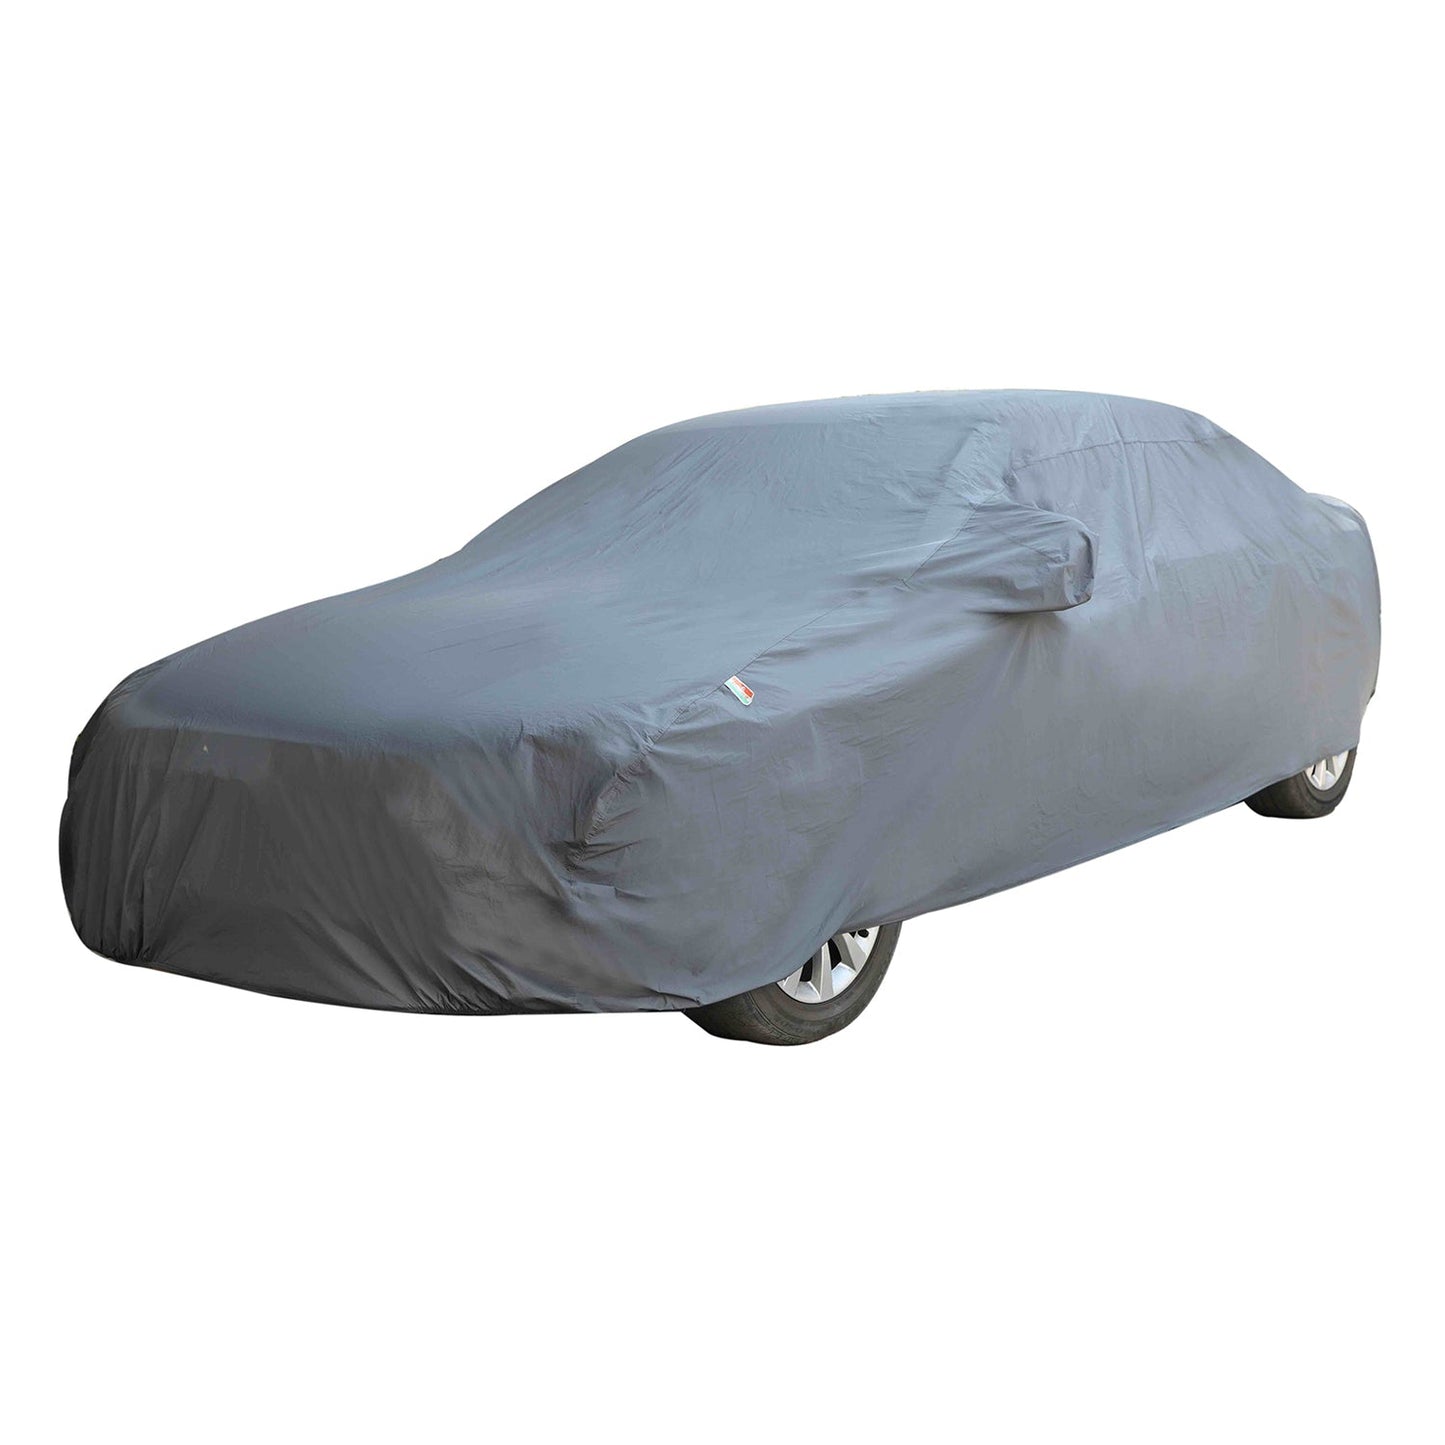 Oshotto Dark Grey 100% Anti Reflective, dustproof and Water Proof Car Body Cover with Mirror Pockets For Jaguar XJ